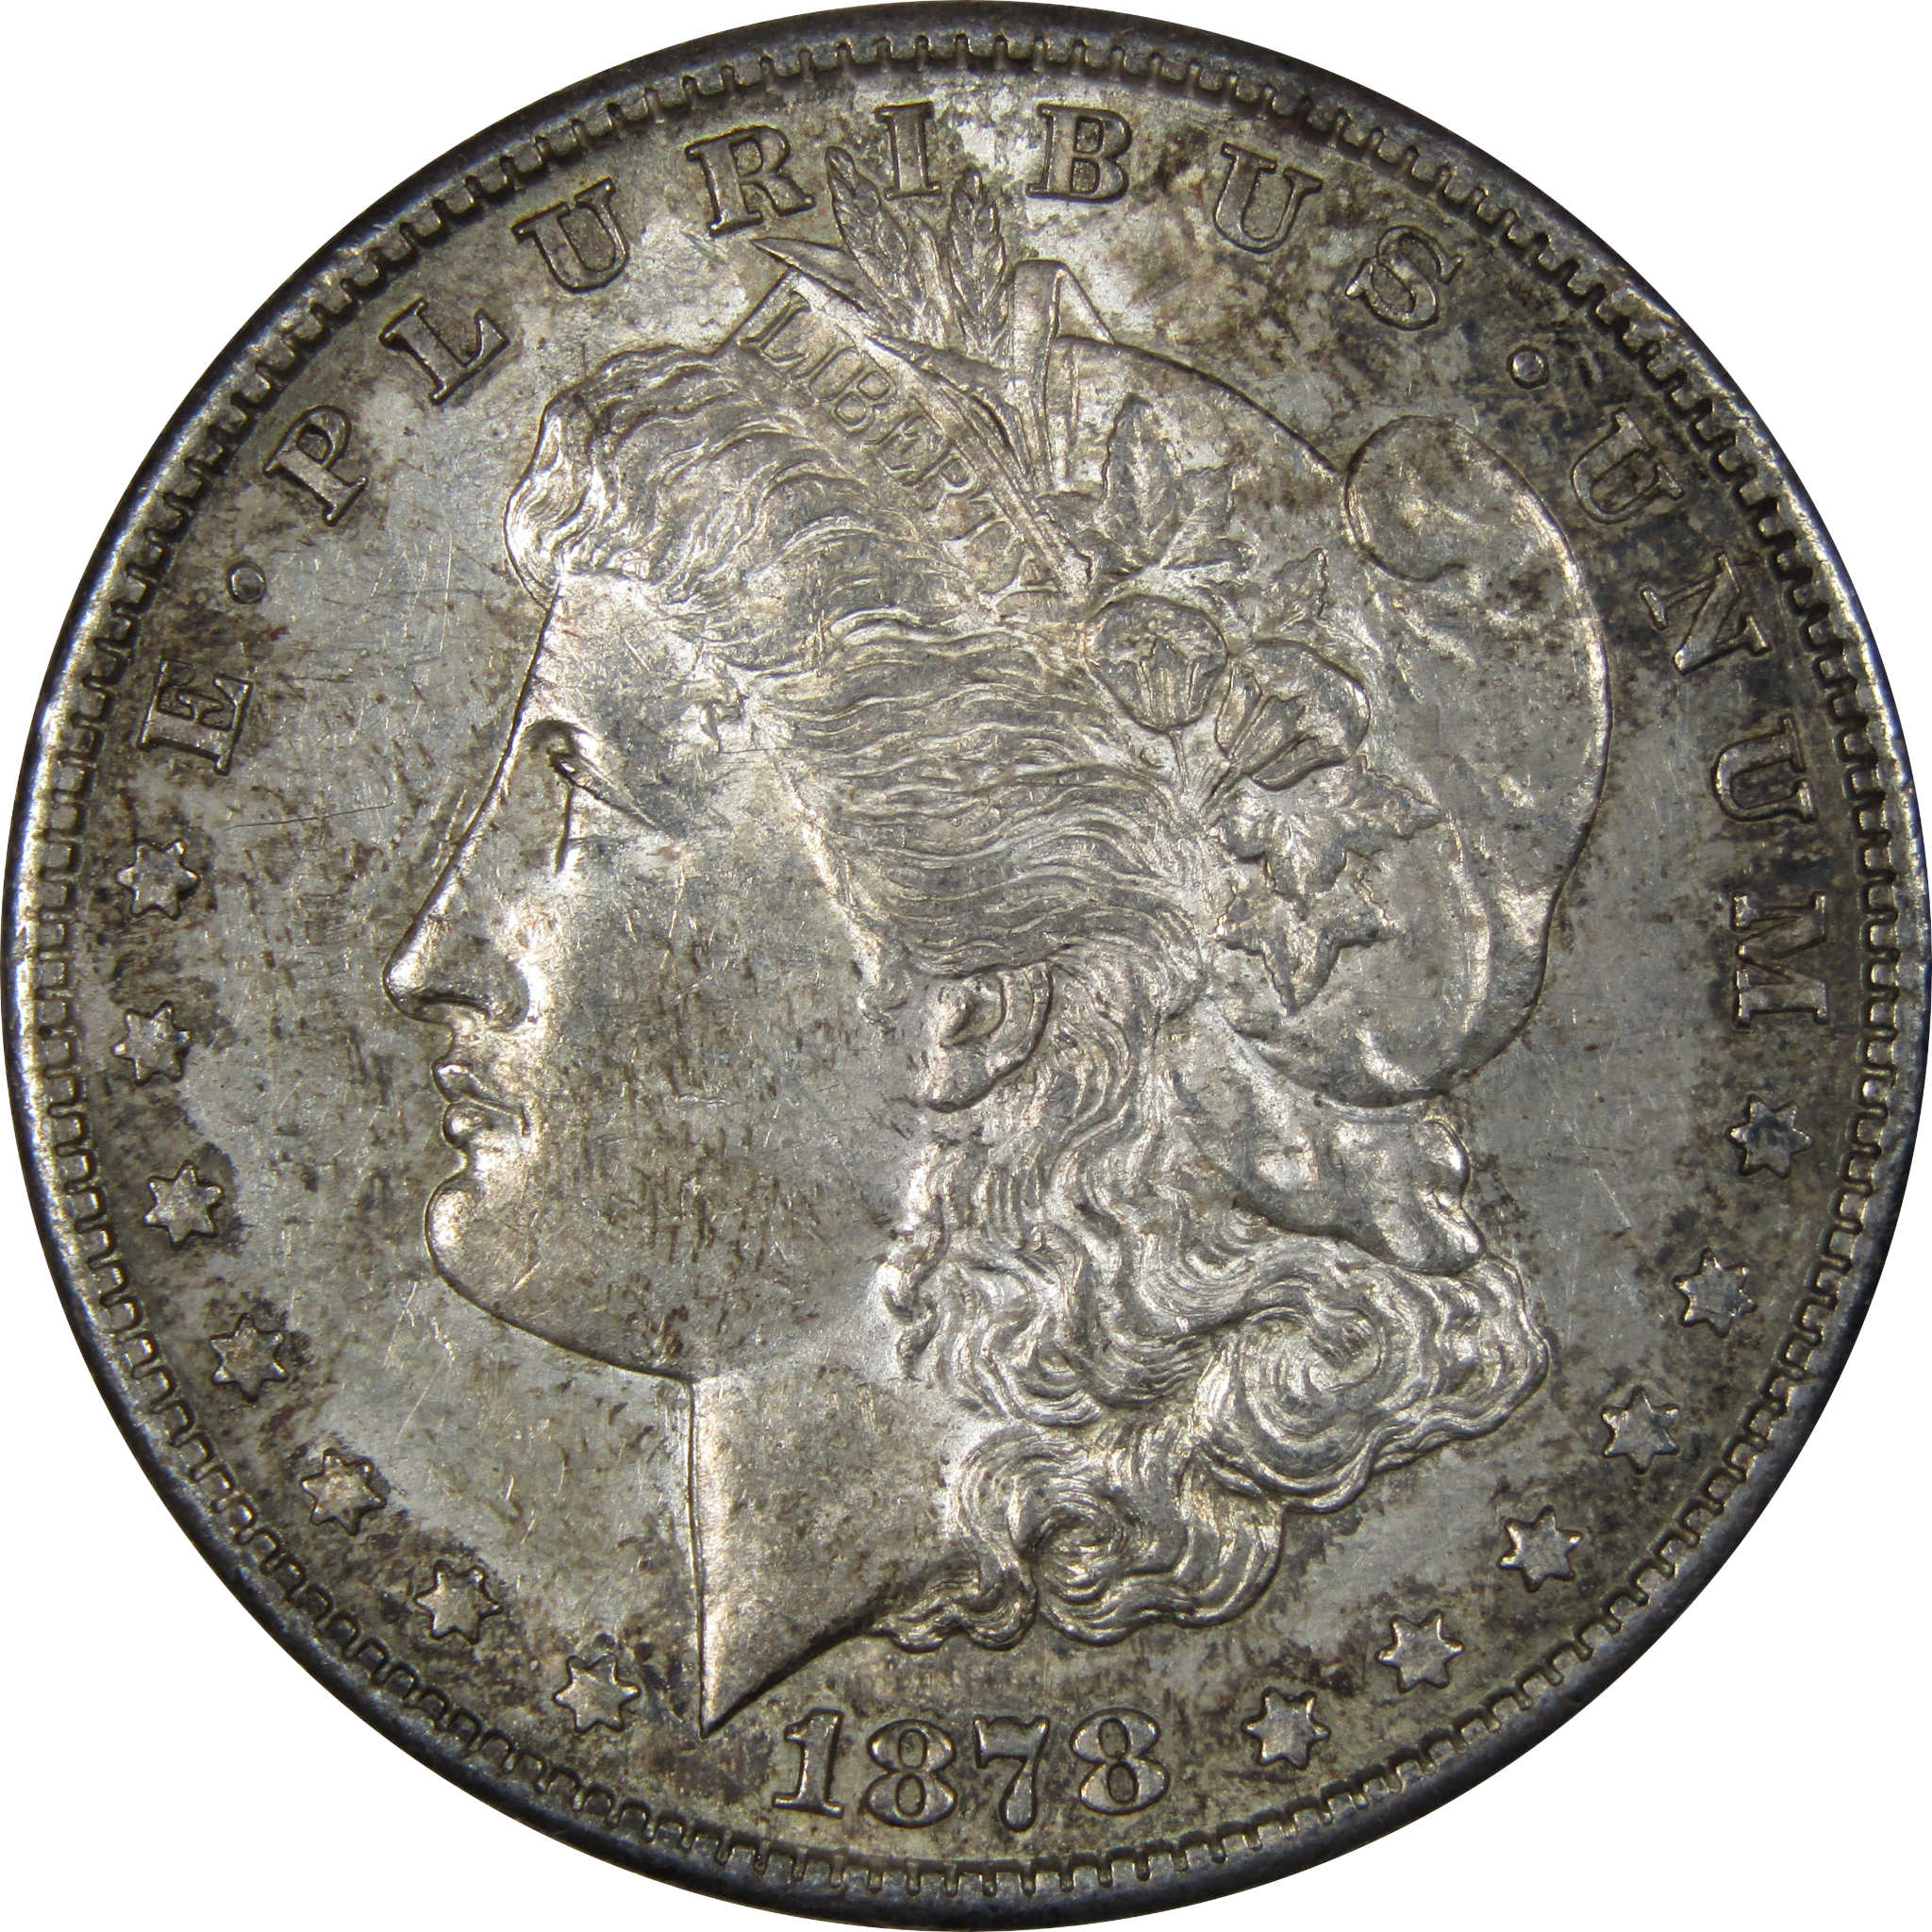 1878 S Morgan Dollar XF EF Extremely Fine 90% Silver SKU:IPC8267 - Morgan coin - Morgan silver dollar - Morgan silver dollar for sale - Profile Coins &amp; Collectibles